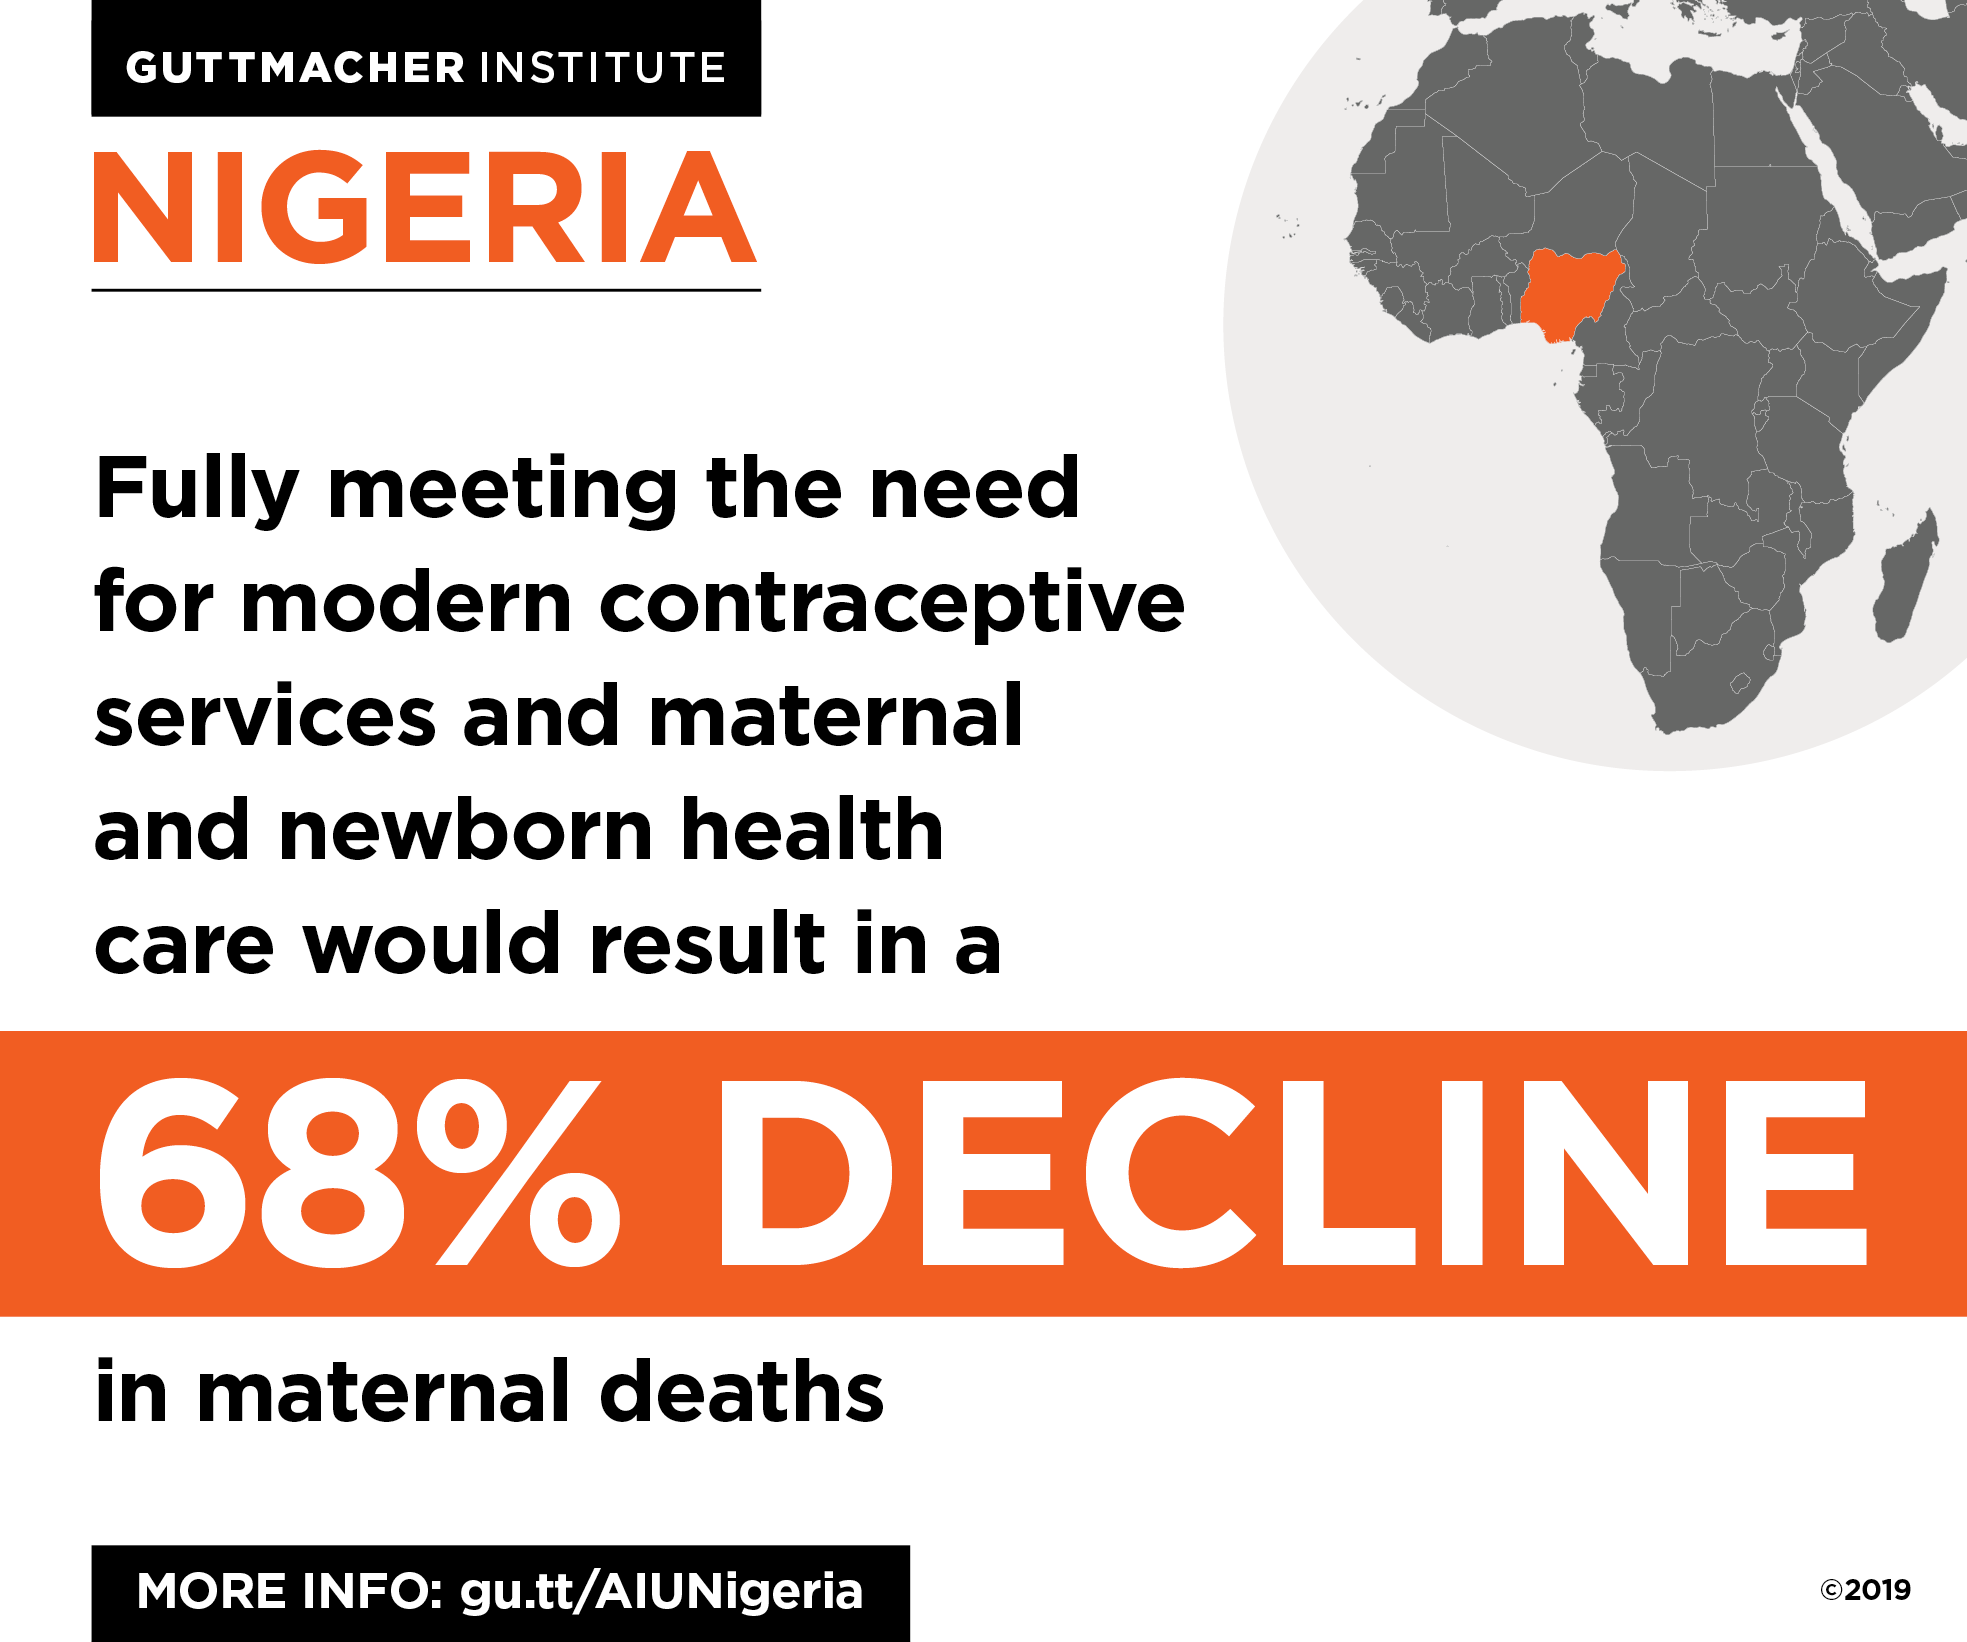 Infographic: In Nigeria, fully meeting the need for modern contraceptive services and maternal and newborn health care would result in a 68% decline in maternal deaths